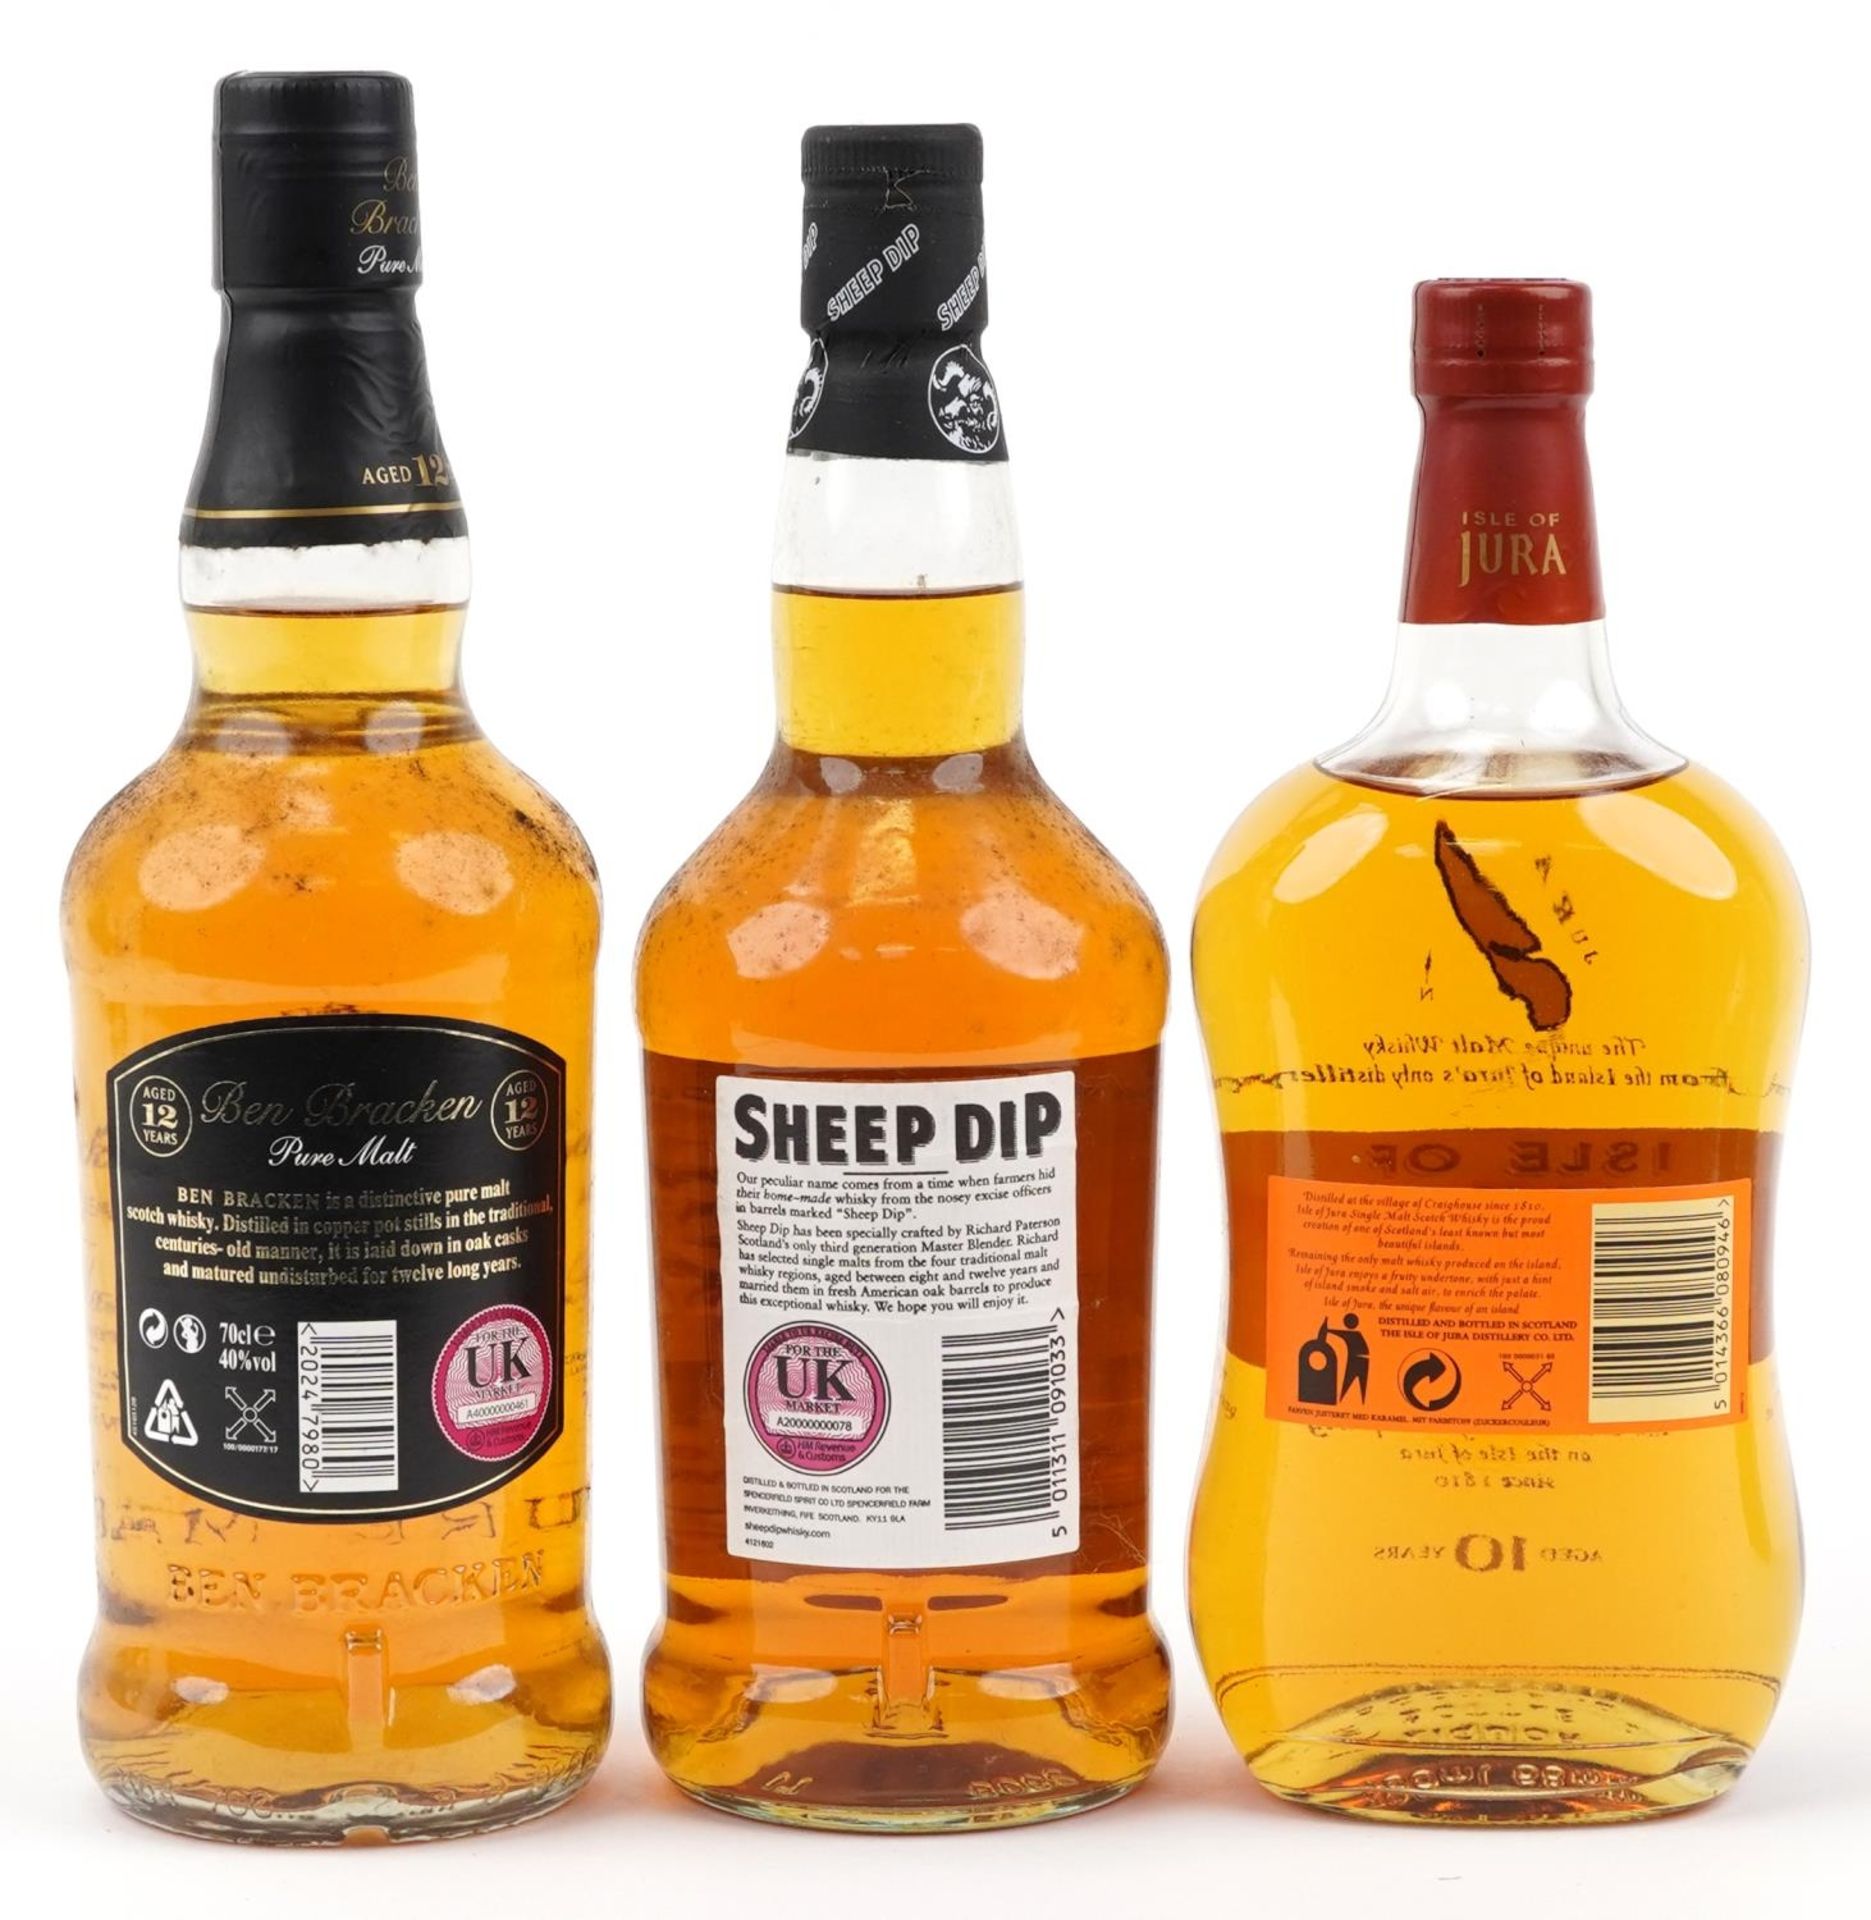 Three bottles of Scotch whisky comprising Isle of Jura aged 10 years, Sheep Dip and Ben Bracken aged - Image 2 of 2